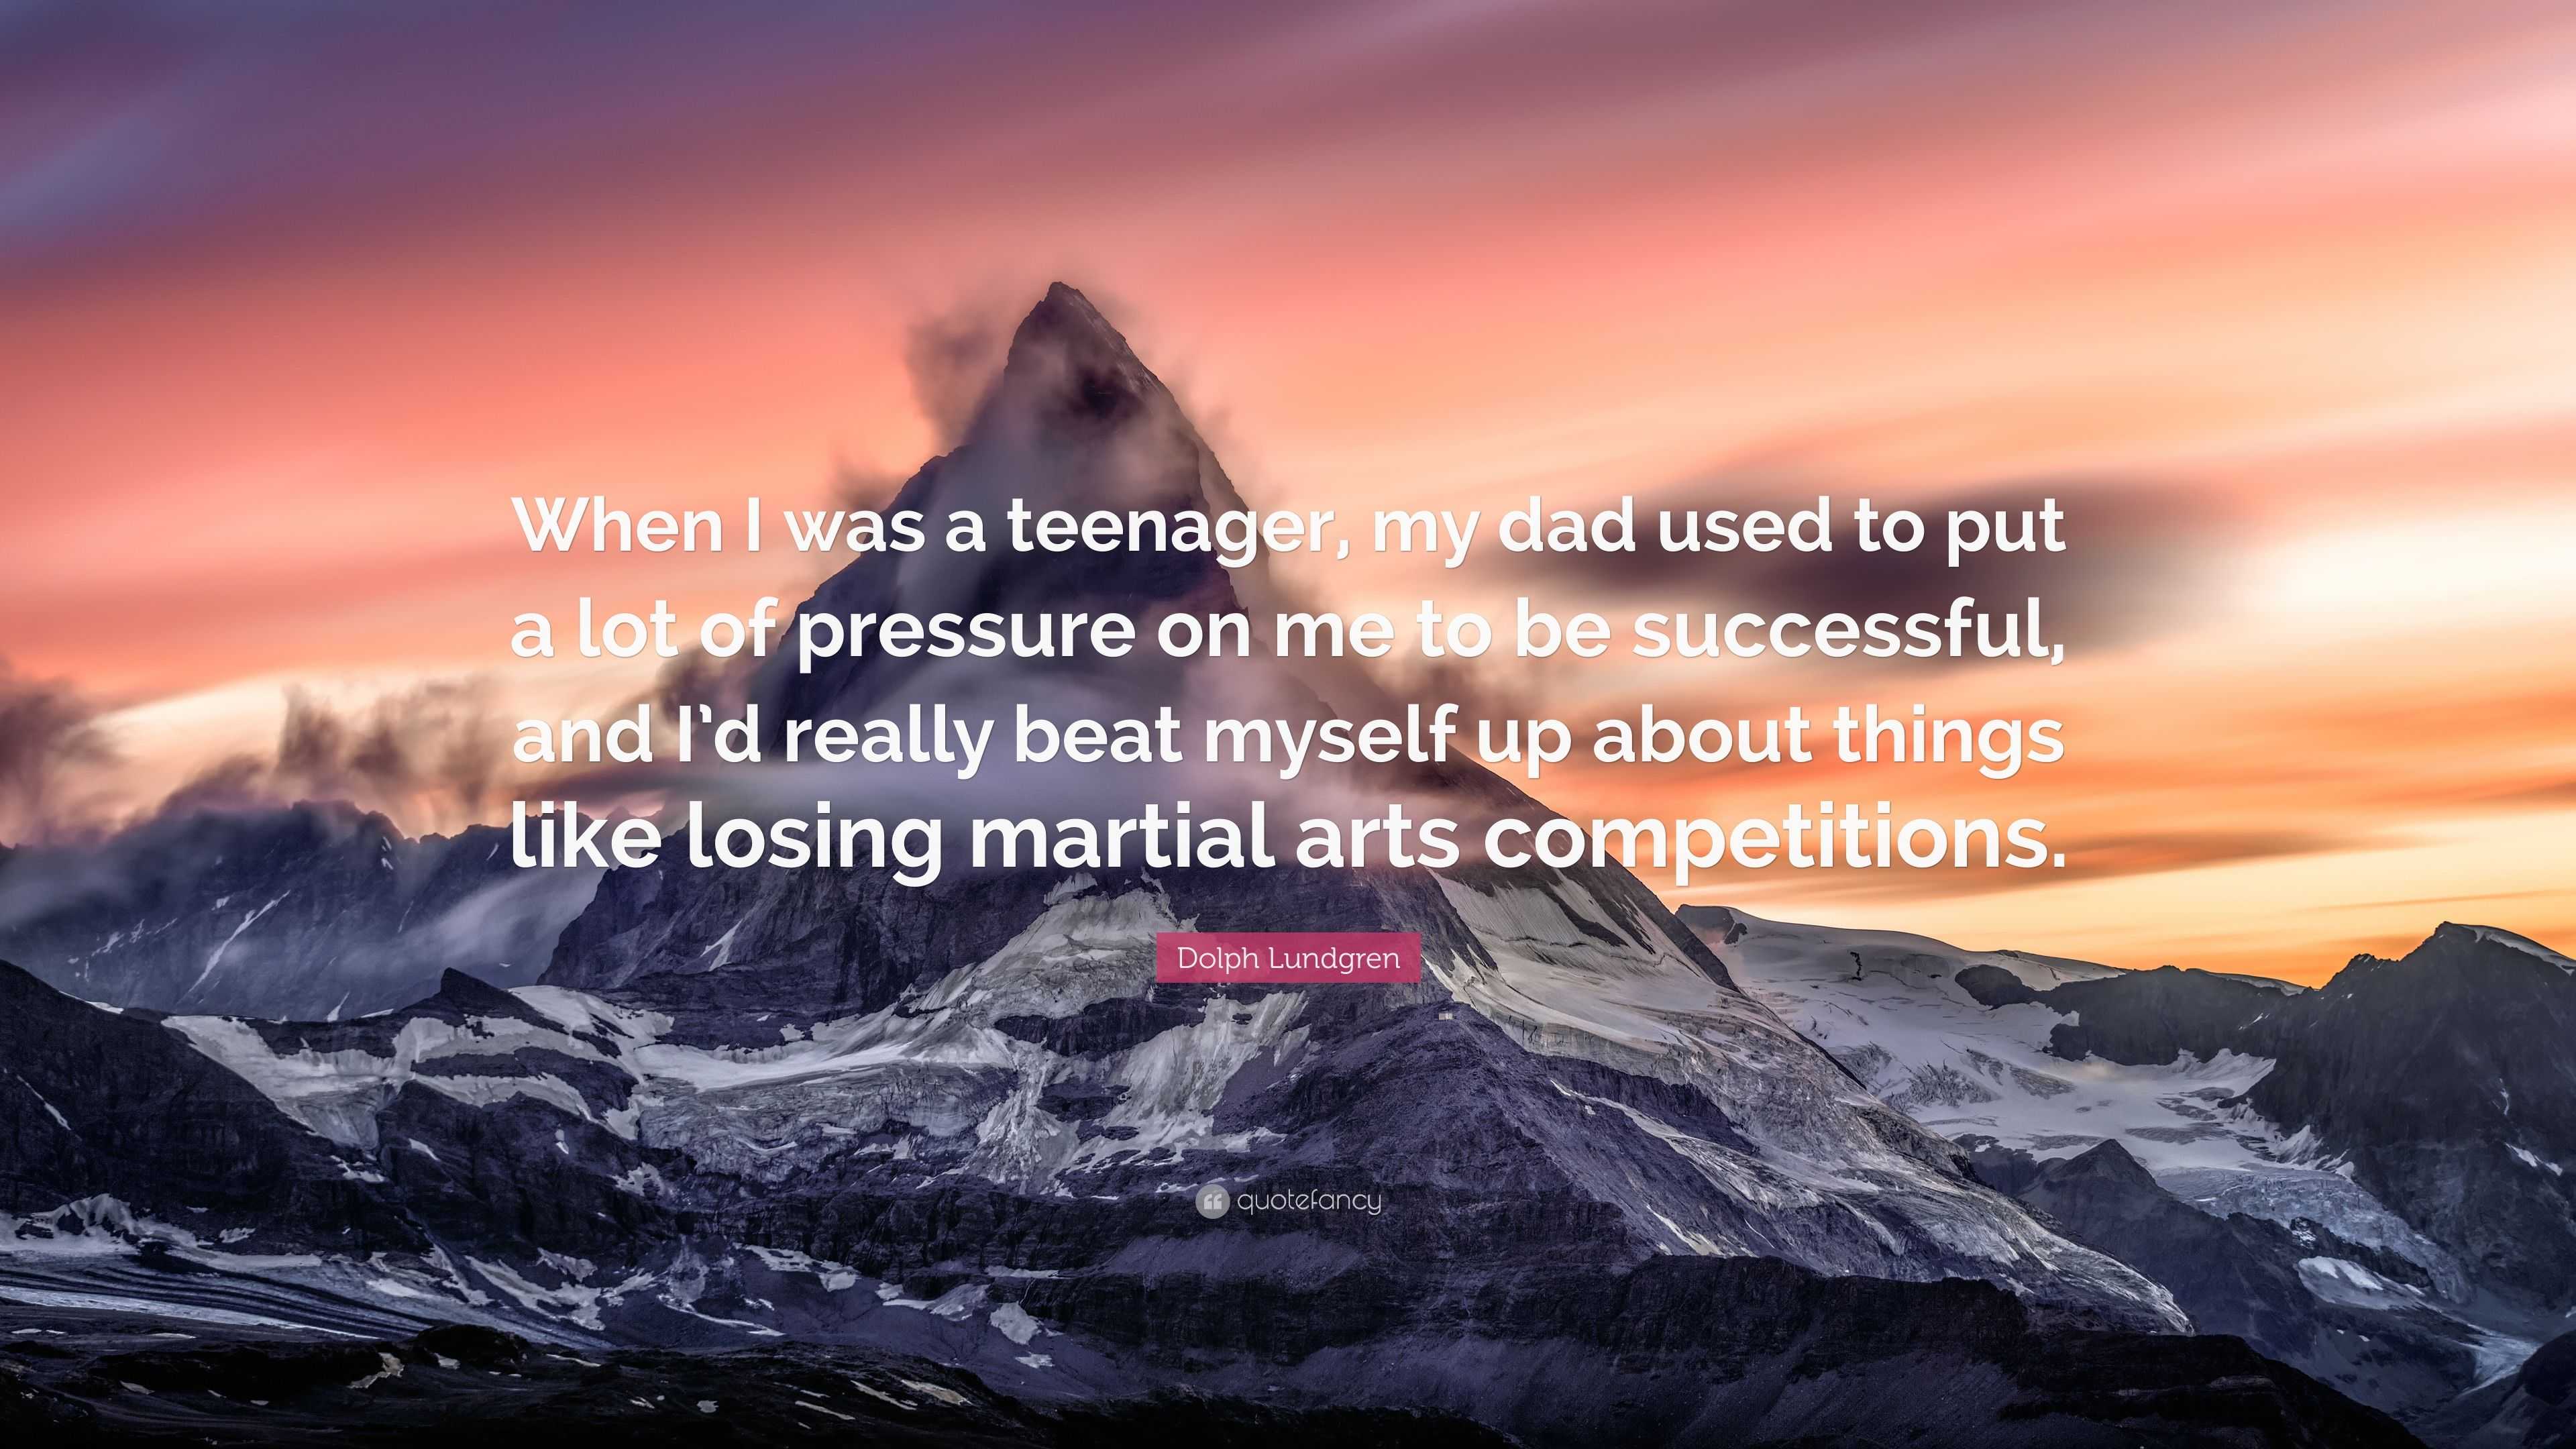 https://quotefancy.com/media/wallpaper/3840x2160/2854398-Dolph-Lundgren-Quote-When-I-was-a-teenager-my-dad-used-to-put-a.jpg